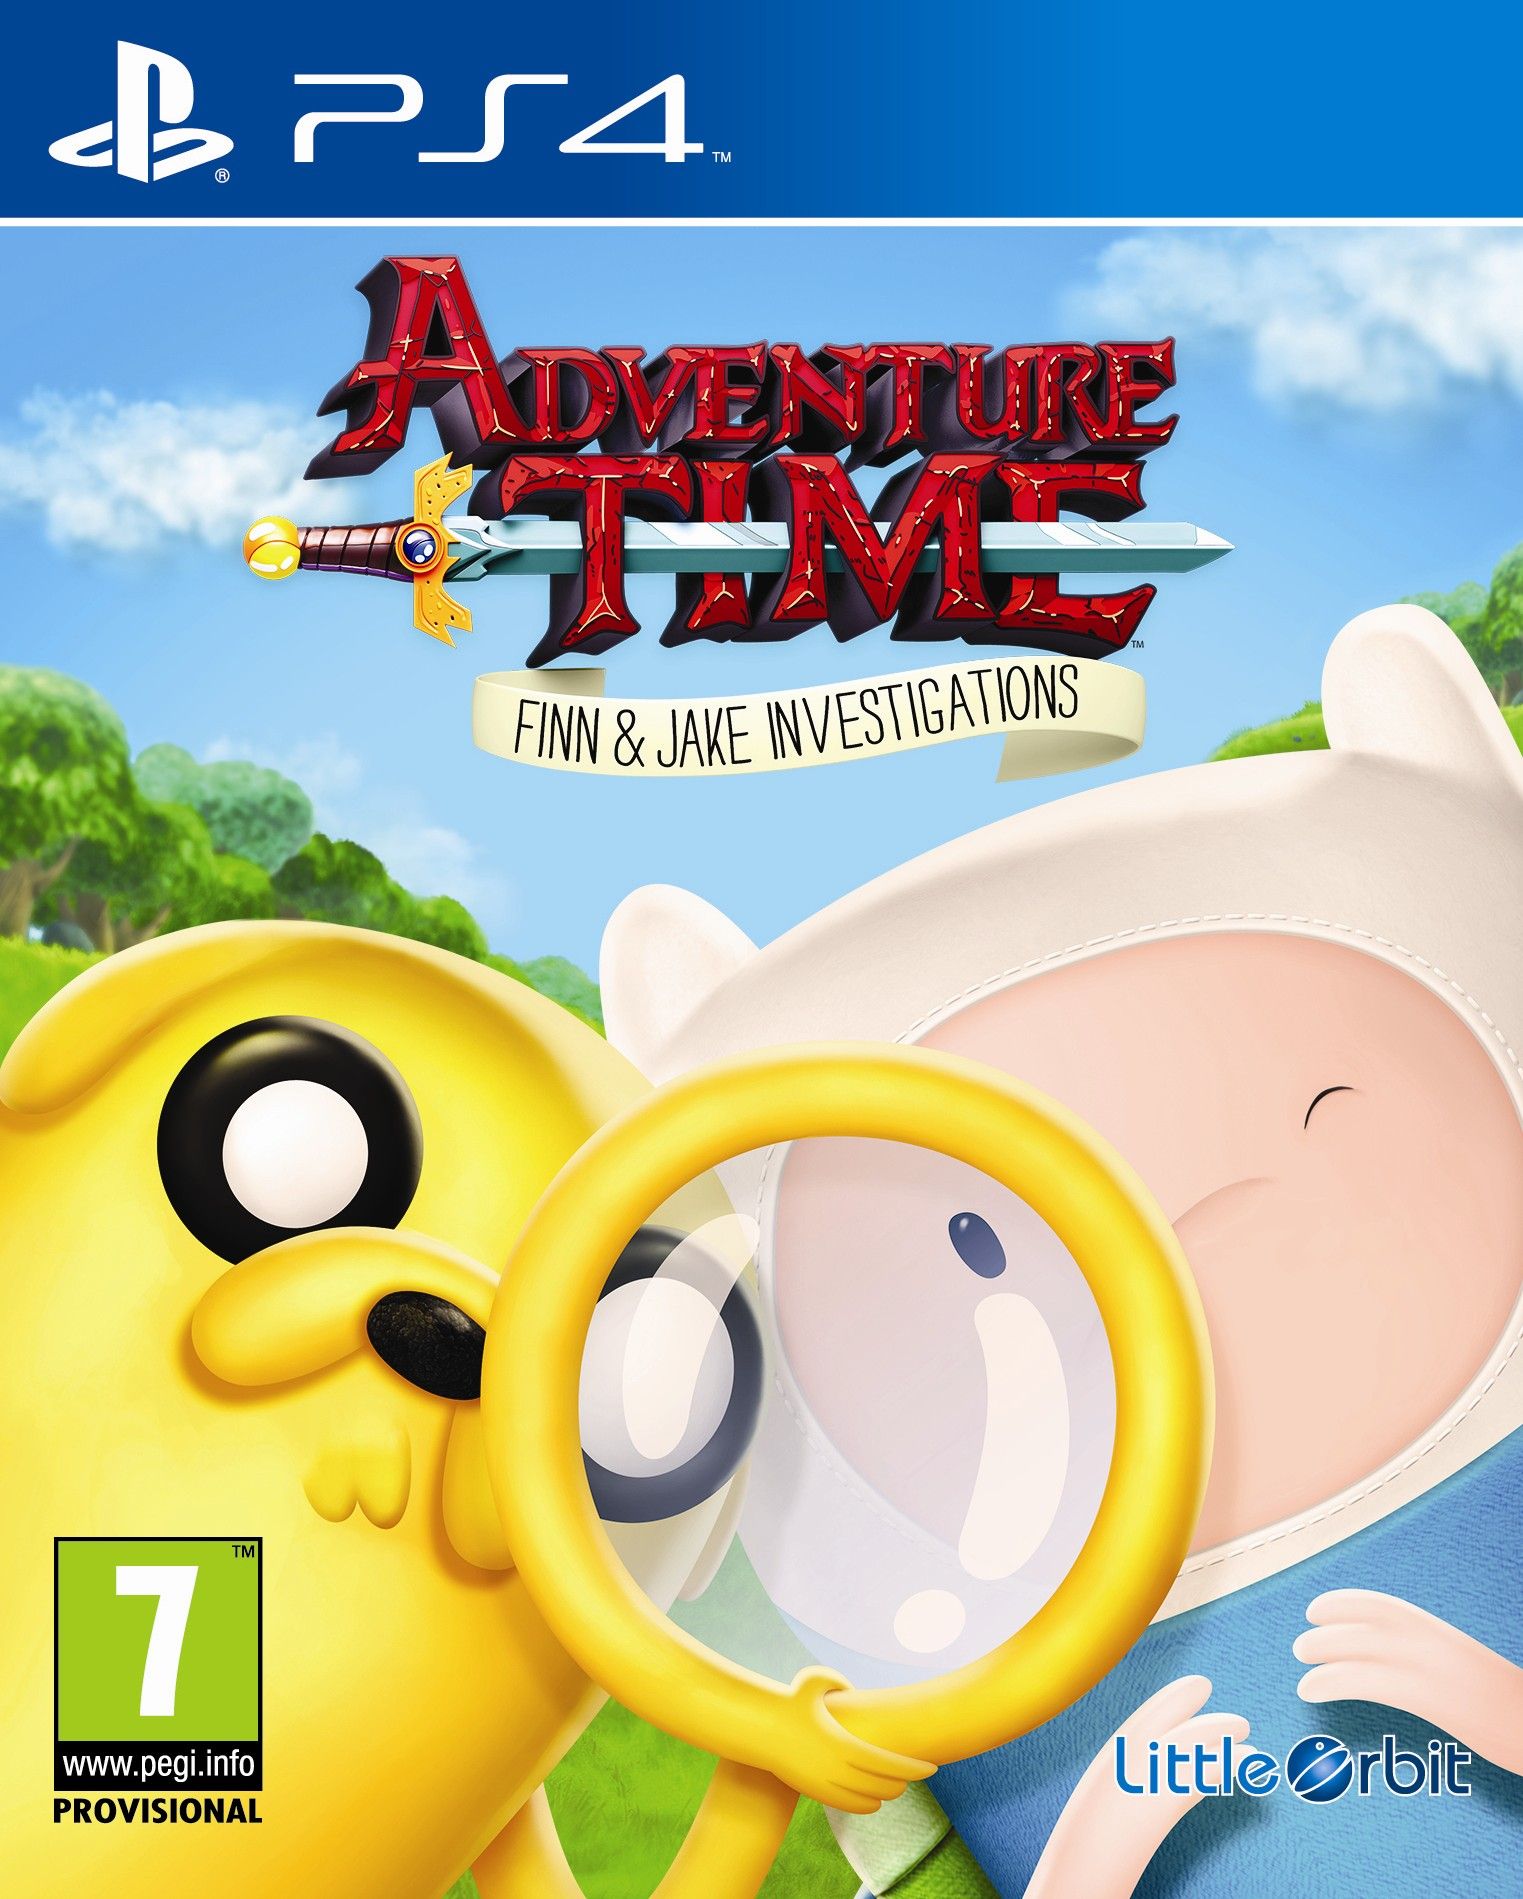 Adventure Time: Finn & Jake Investigations (PS4), Vicious Cycle Software